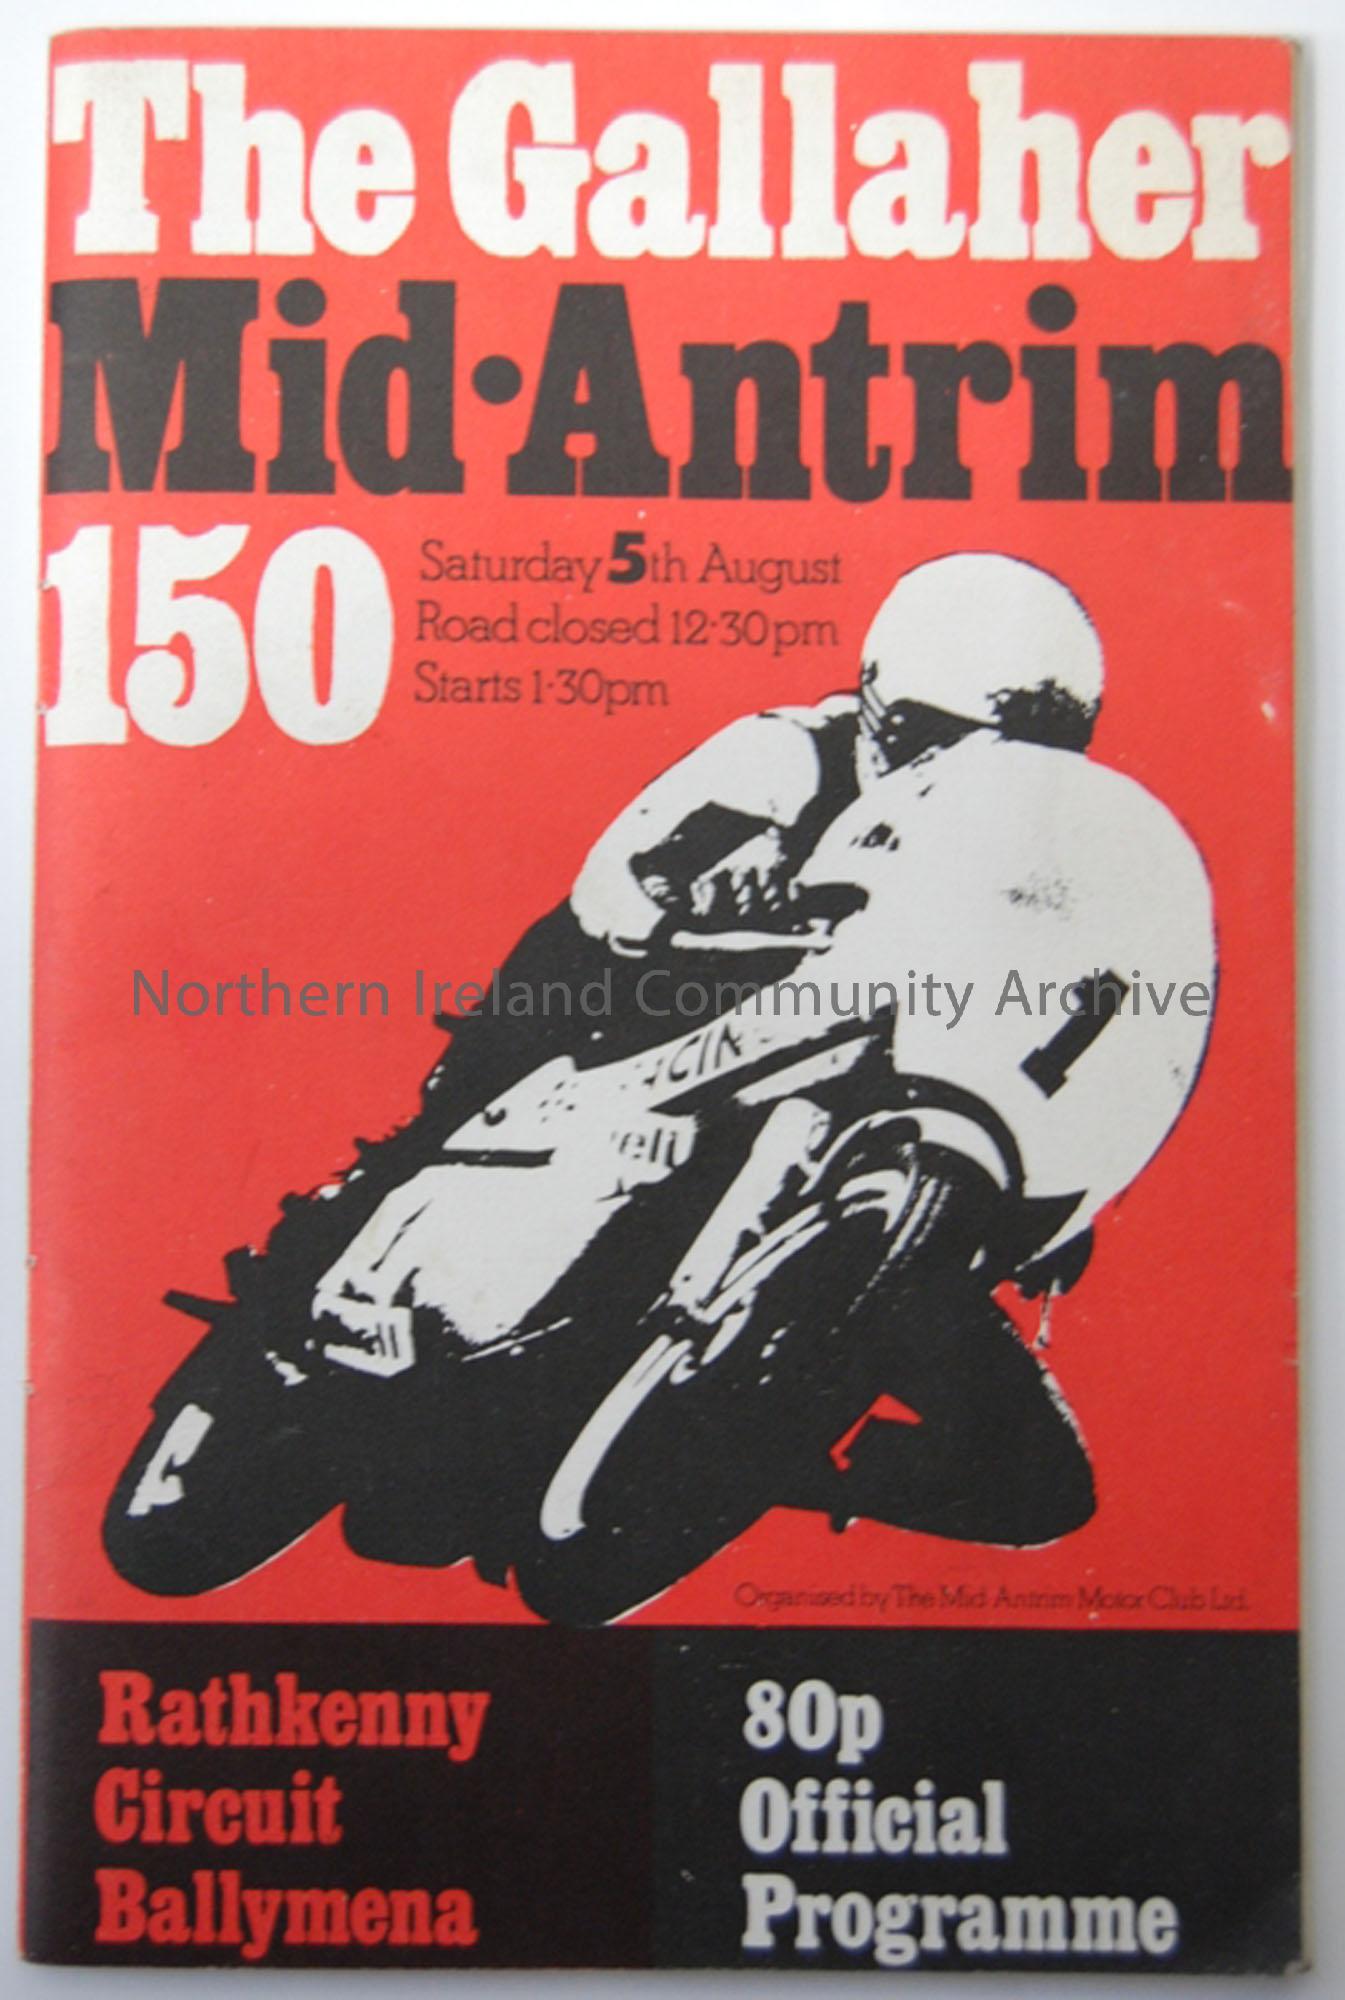 The Gallagher Mid-Antrim ‘150’ Motorcycle road race, Saturday 5th August, starting at 1.30pm, Rathkenny circuit, Ballymena.